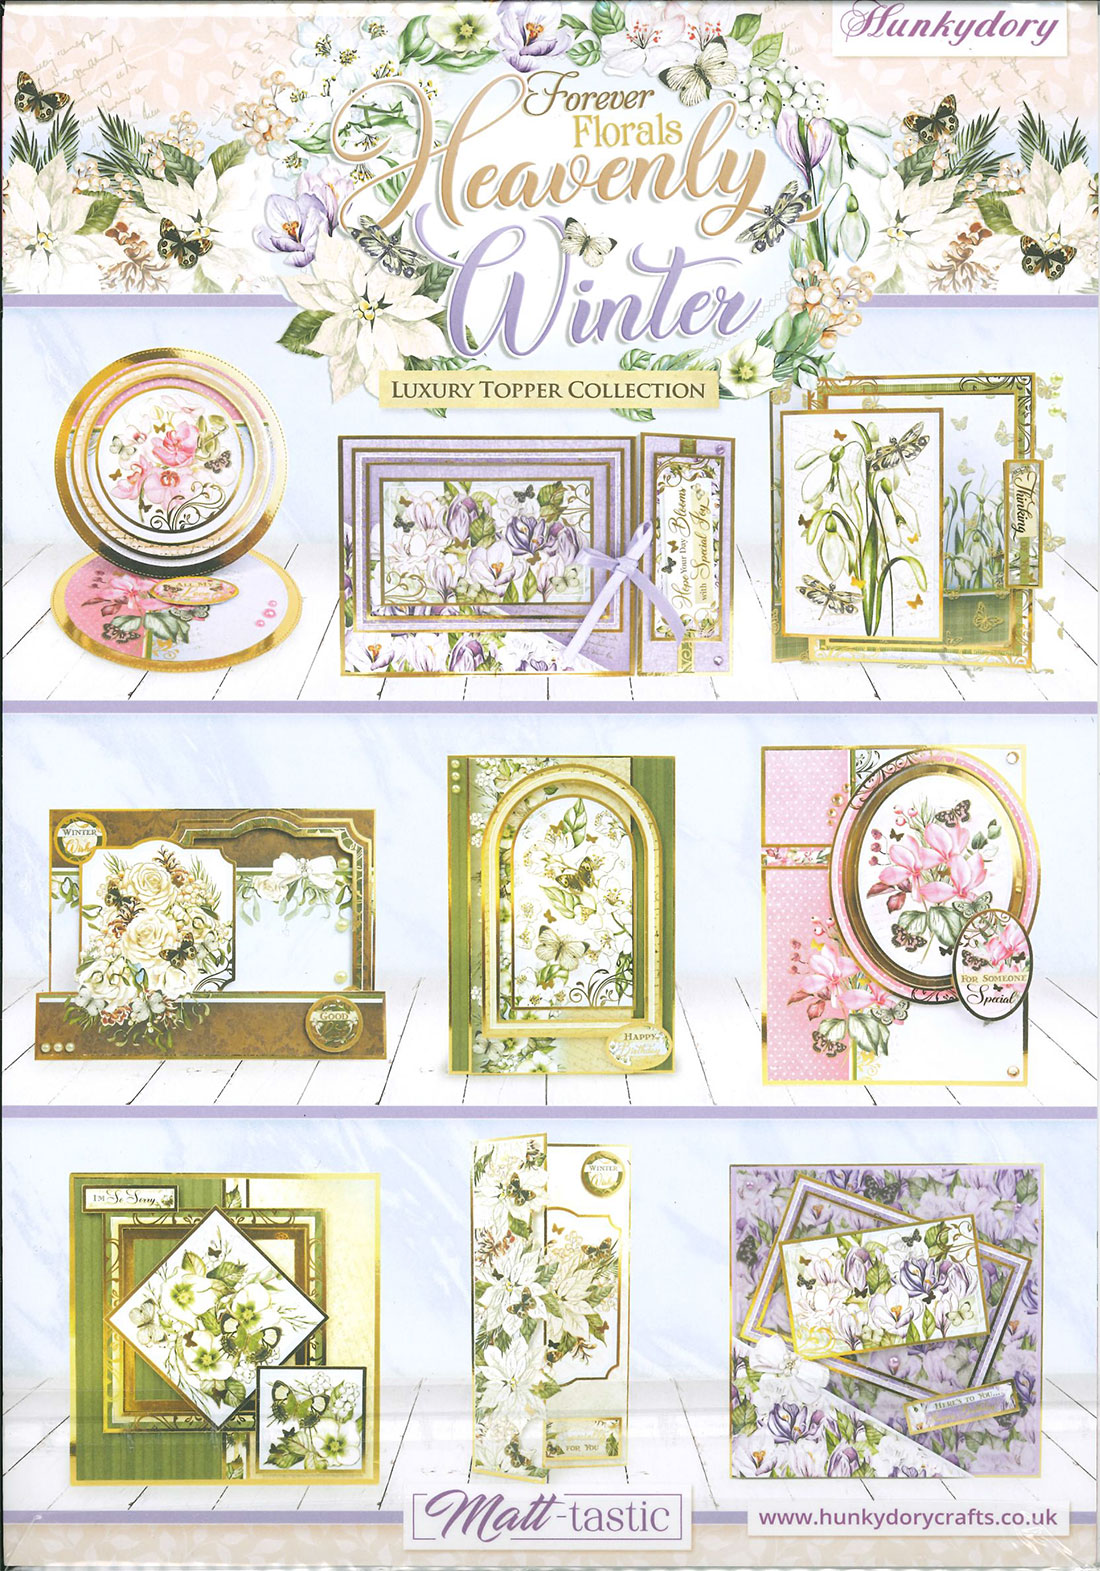 Heavenly Winter Forever Florals Luxury Topper Collection with 2 Bonus Topper Sheets